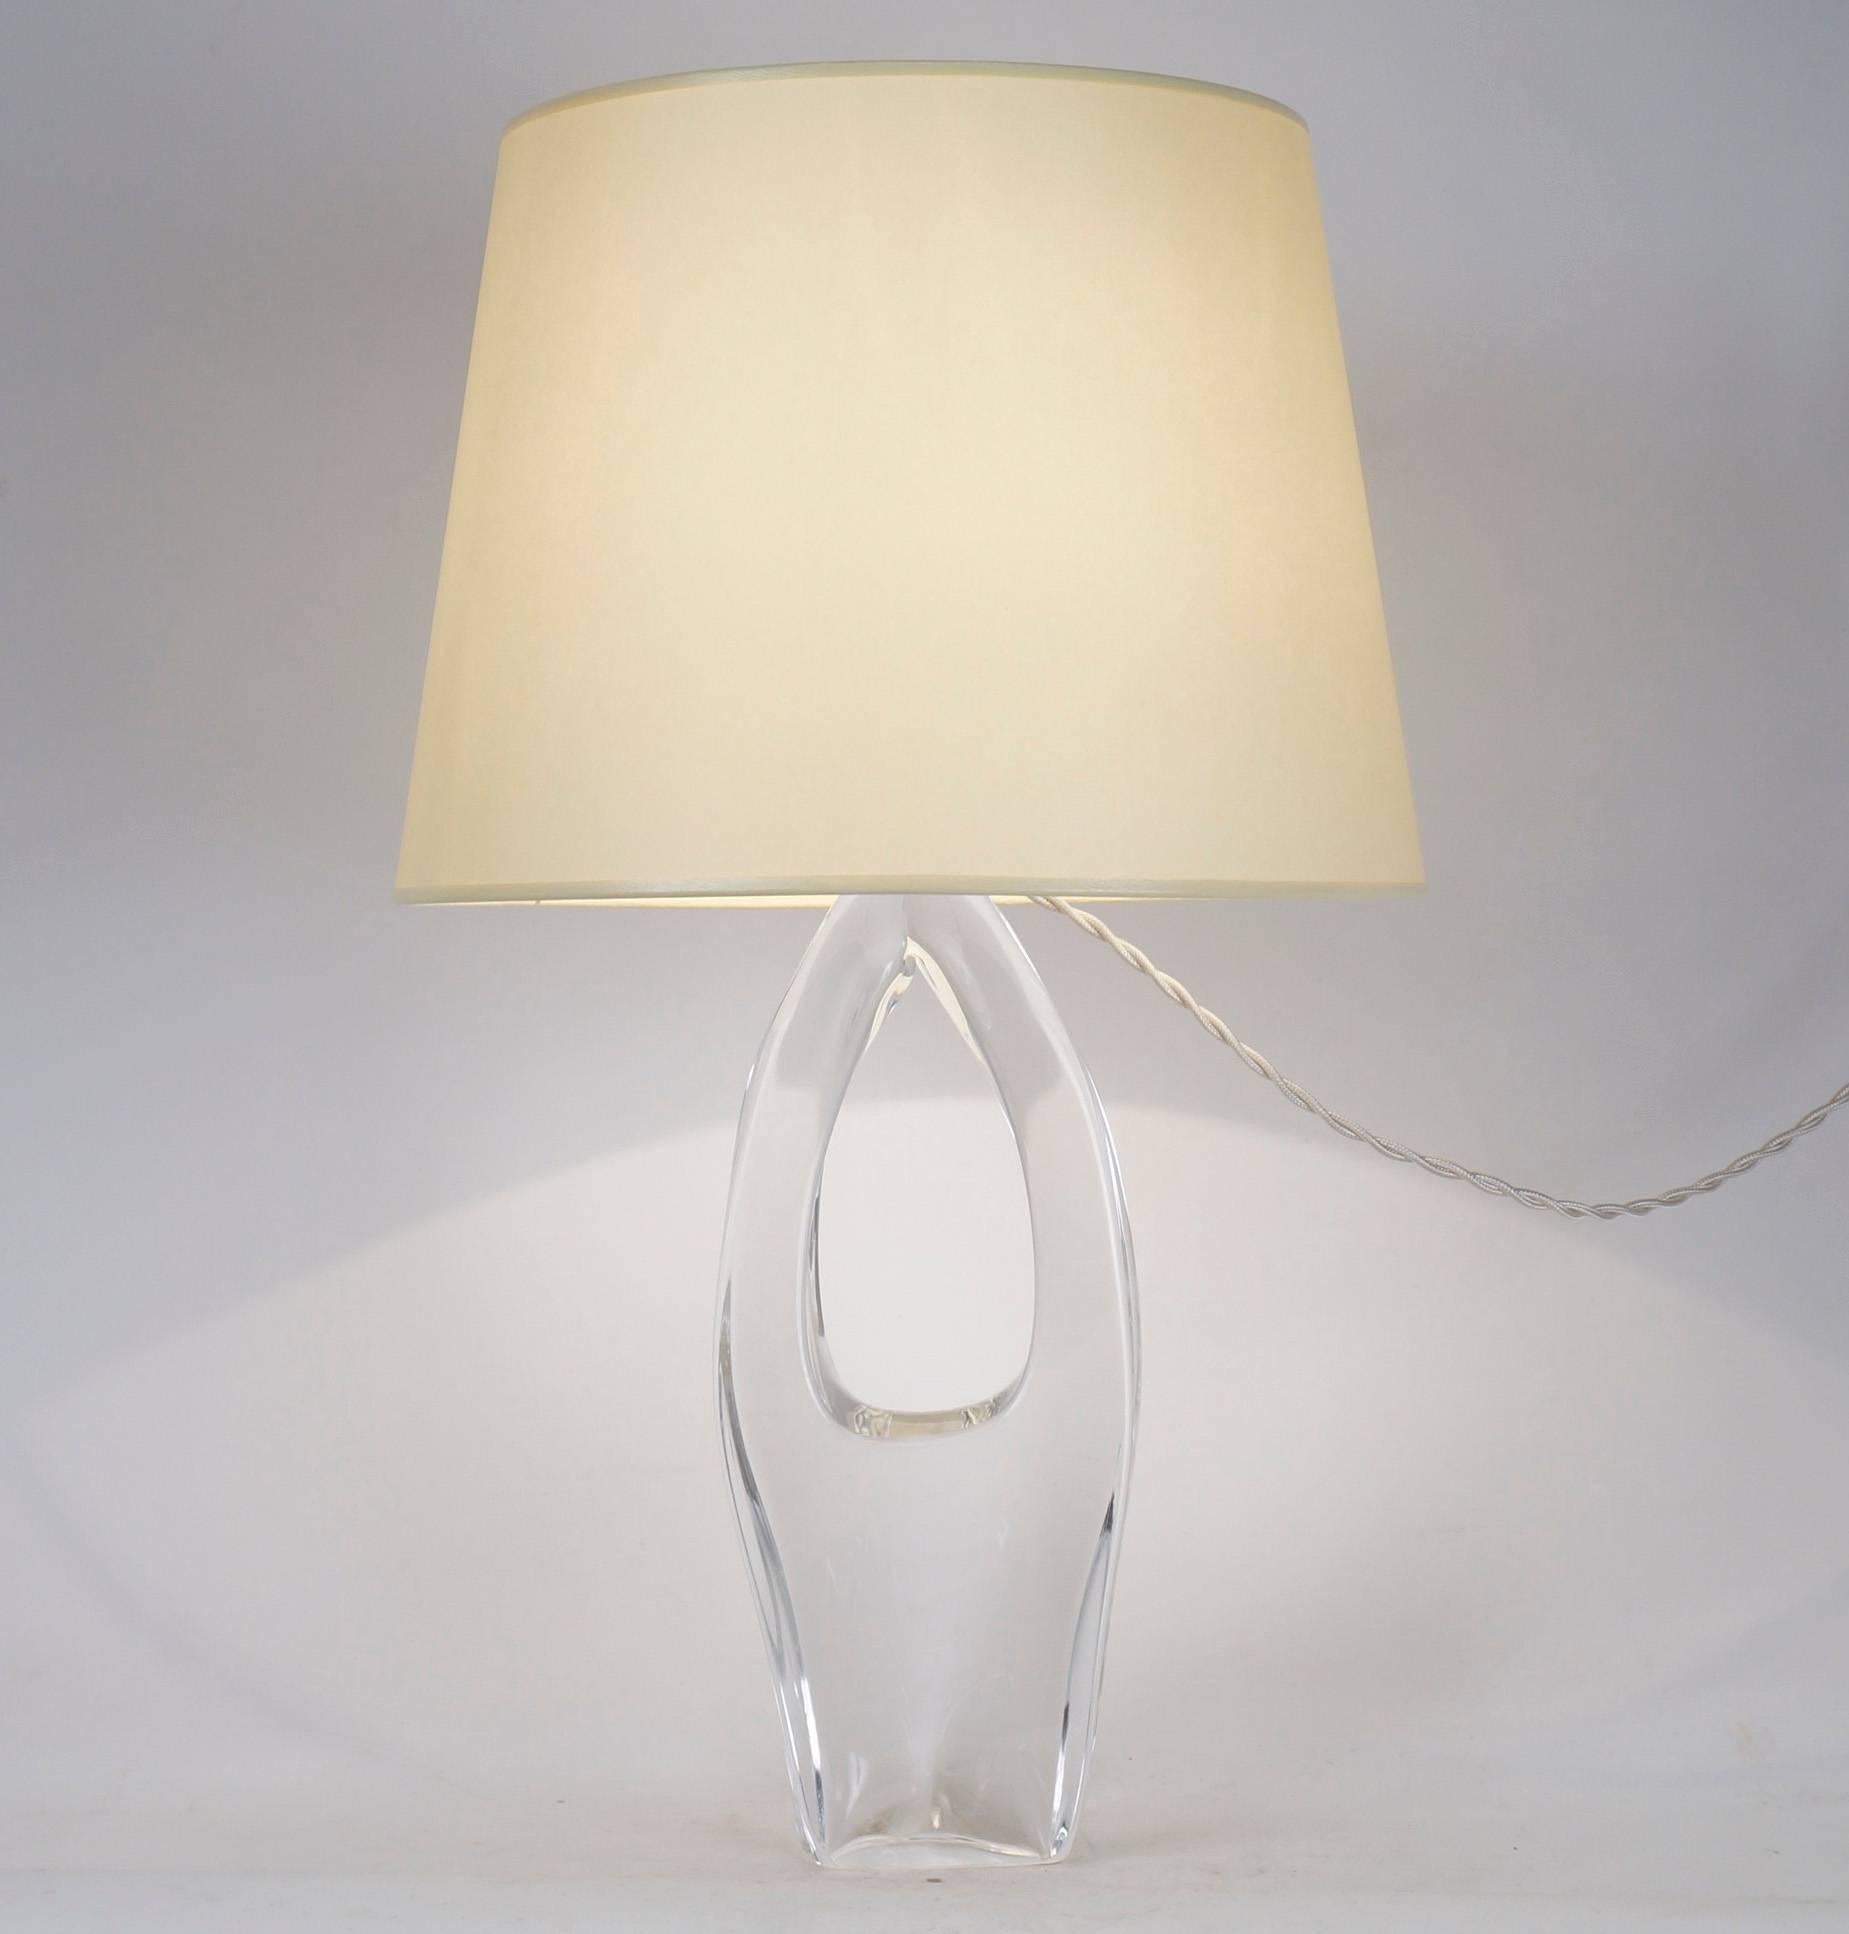 Crystal lamp by Daum signed on the base Daum France.
Custom-made fabric lampshades.
Rewired with twisted silk cord.
US standard plug on request.

Measures: Ceramic 29 cm, 11.4 in.
Height with lampshade: 48 cm, 18.9 in.